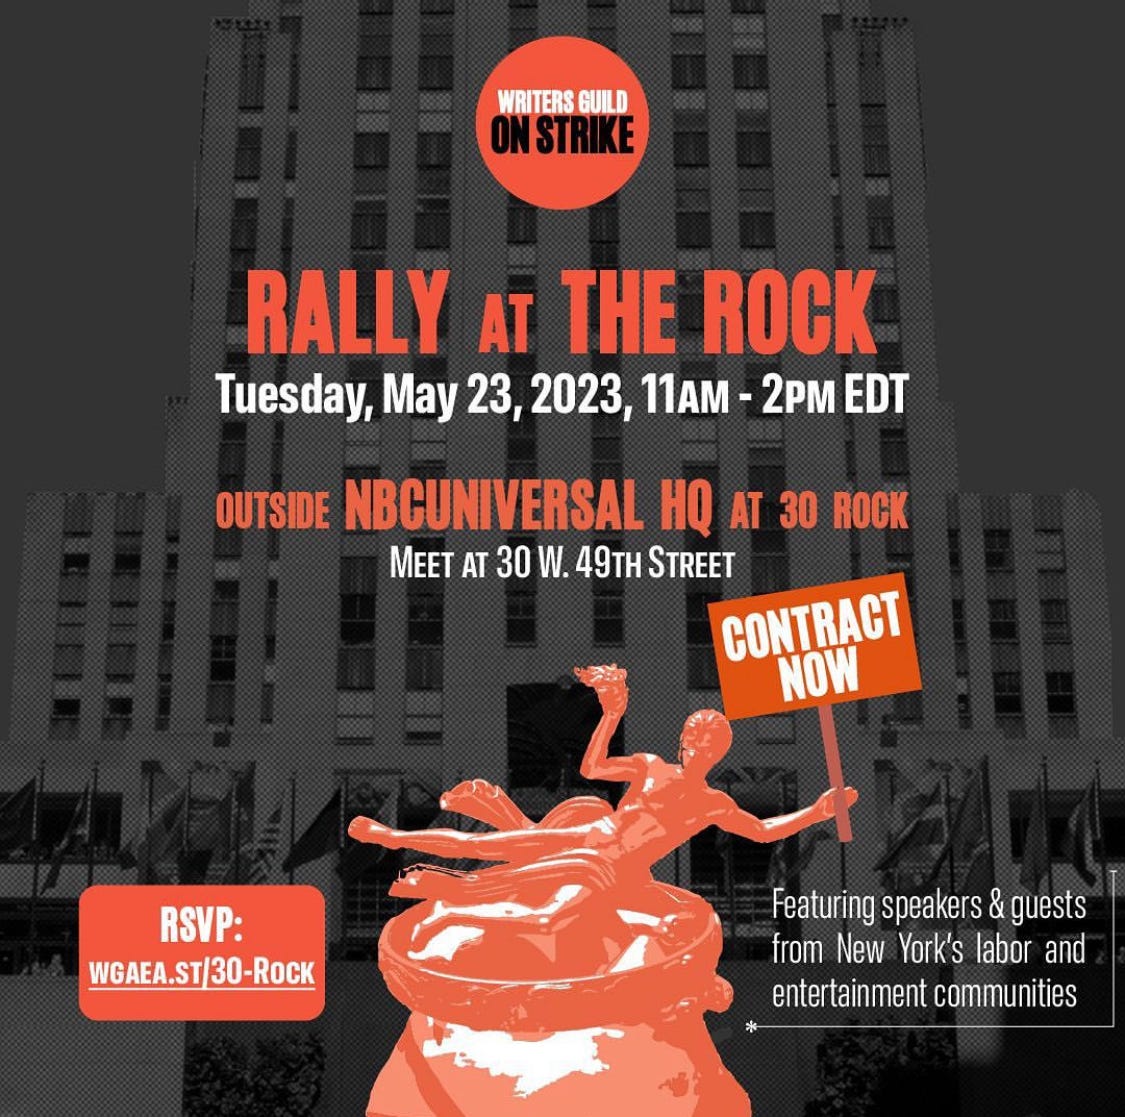 Poster for the rally at 30 Rock from 11-2 on Tuesday 5/23.